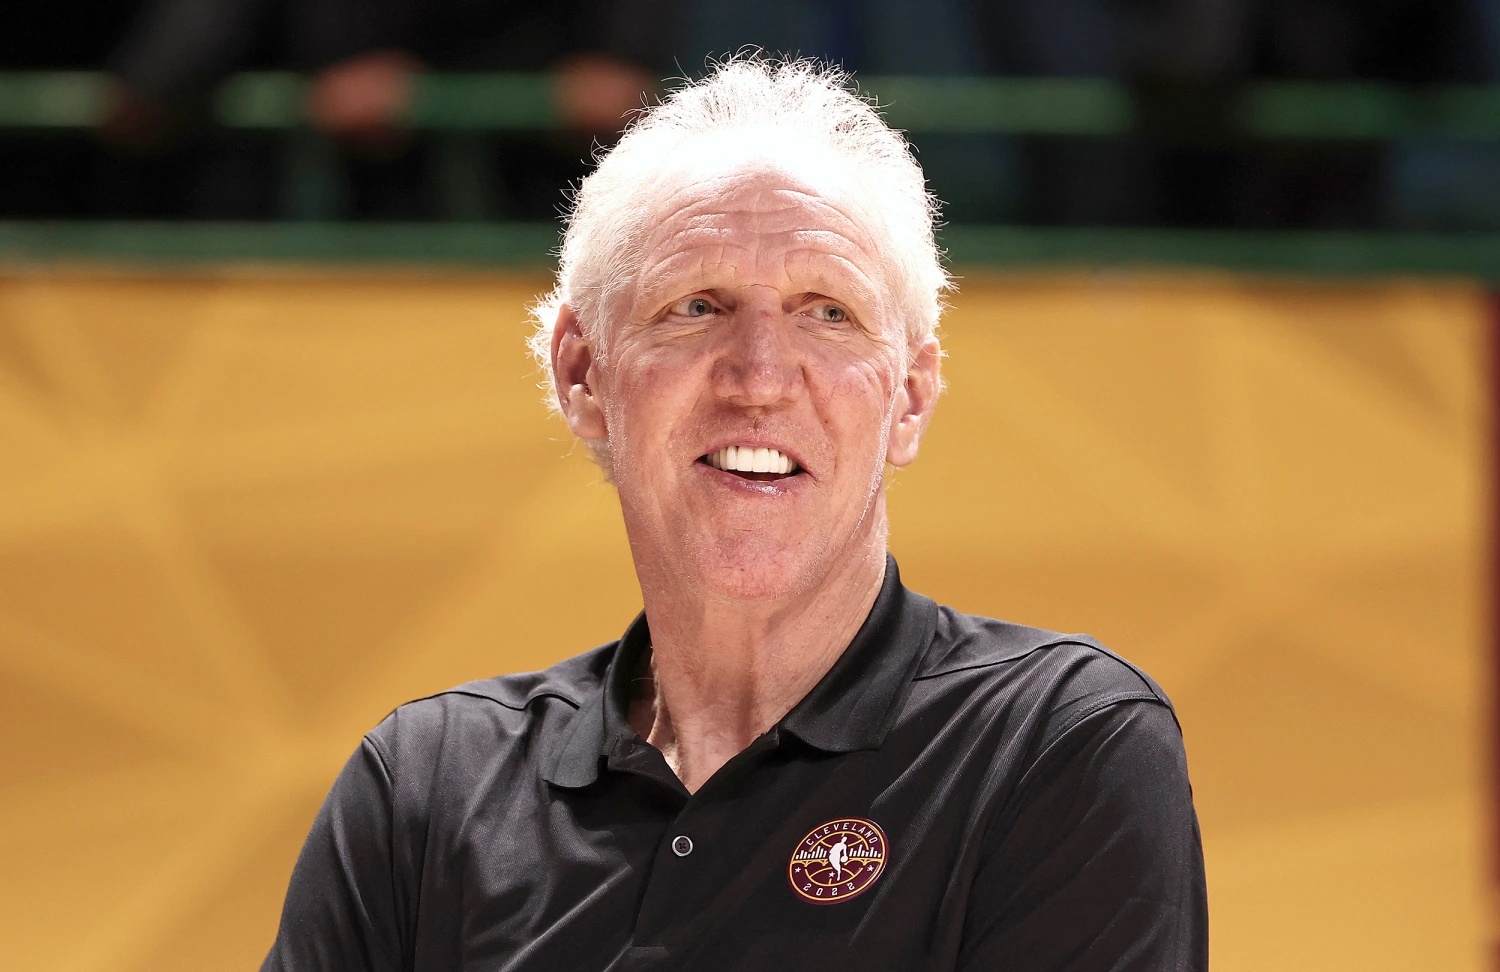 what cancer did Bill Walton have